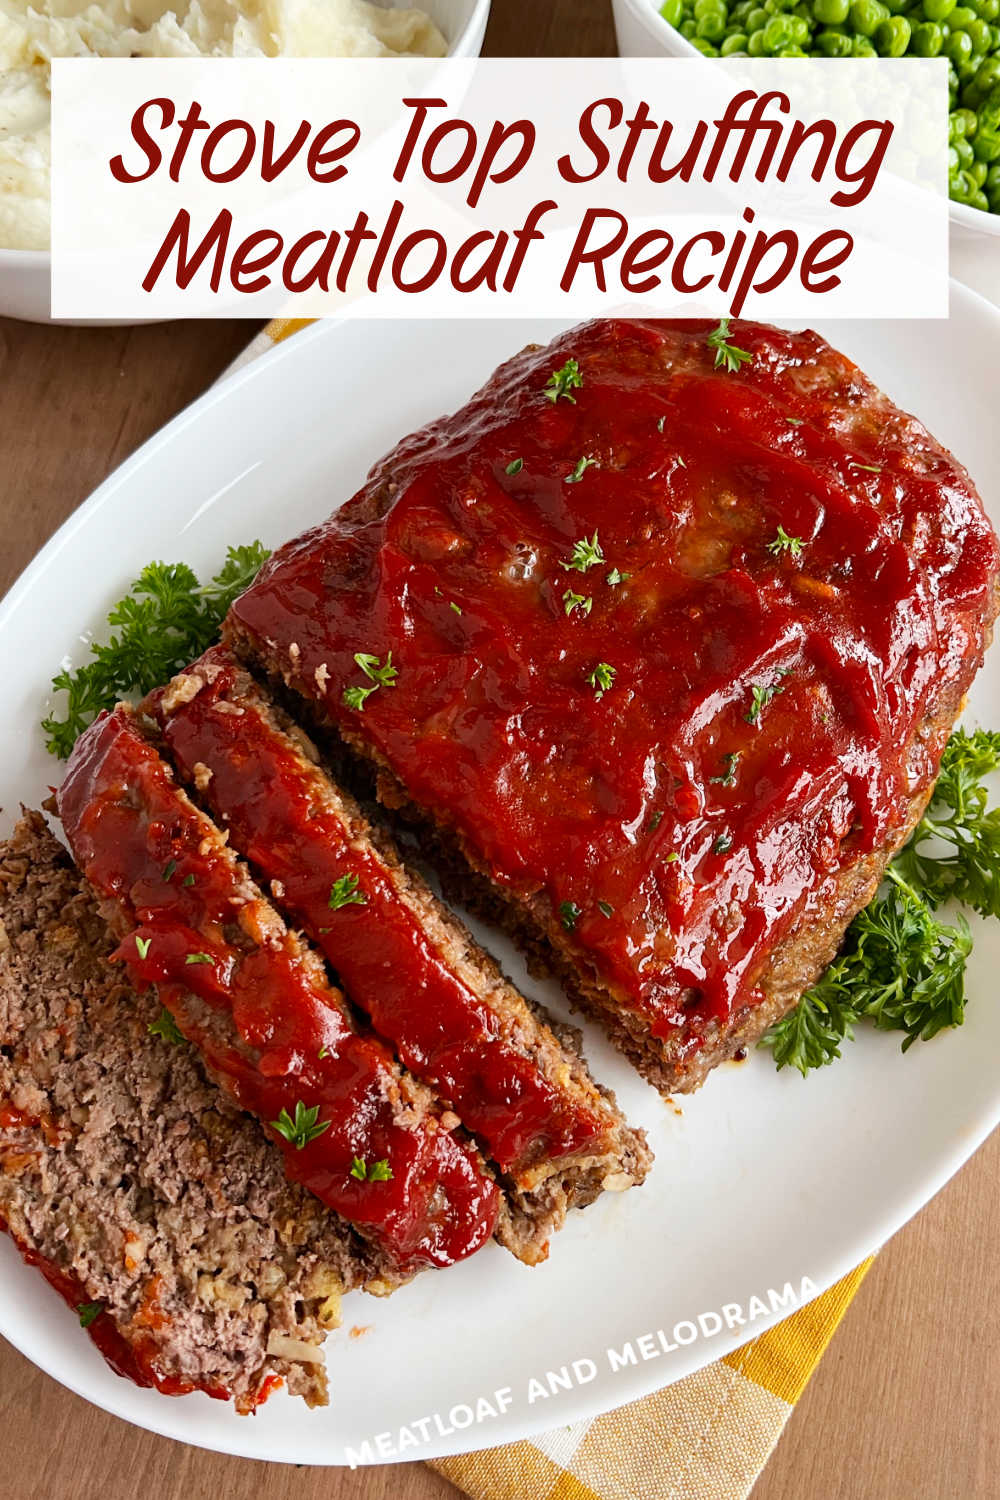 Stove Top Stuffing Meatloaf is an easy meatloaf recipe with Stove Top Stuffing in place of bread crumbs. An easy dinner recipe the whole family loves and perfect for busy weeknights! via @meamel